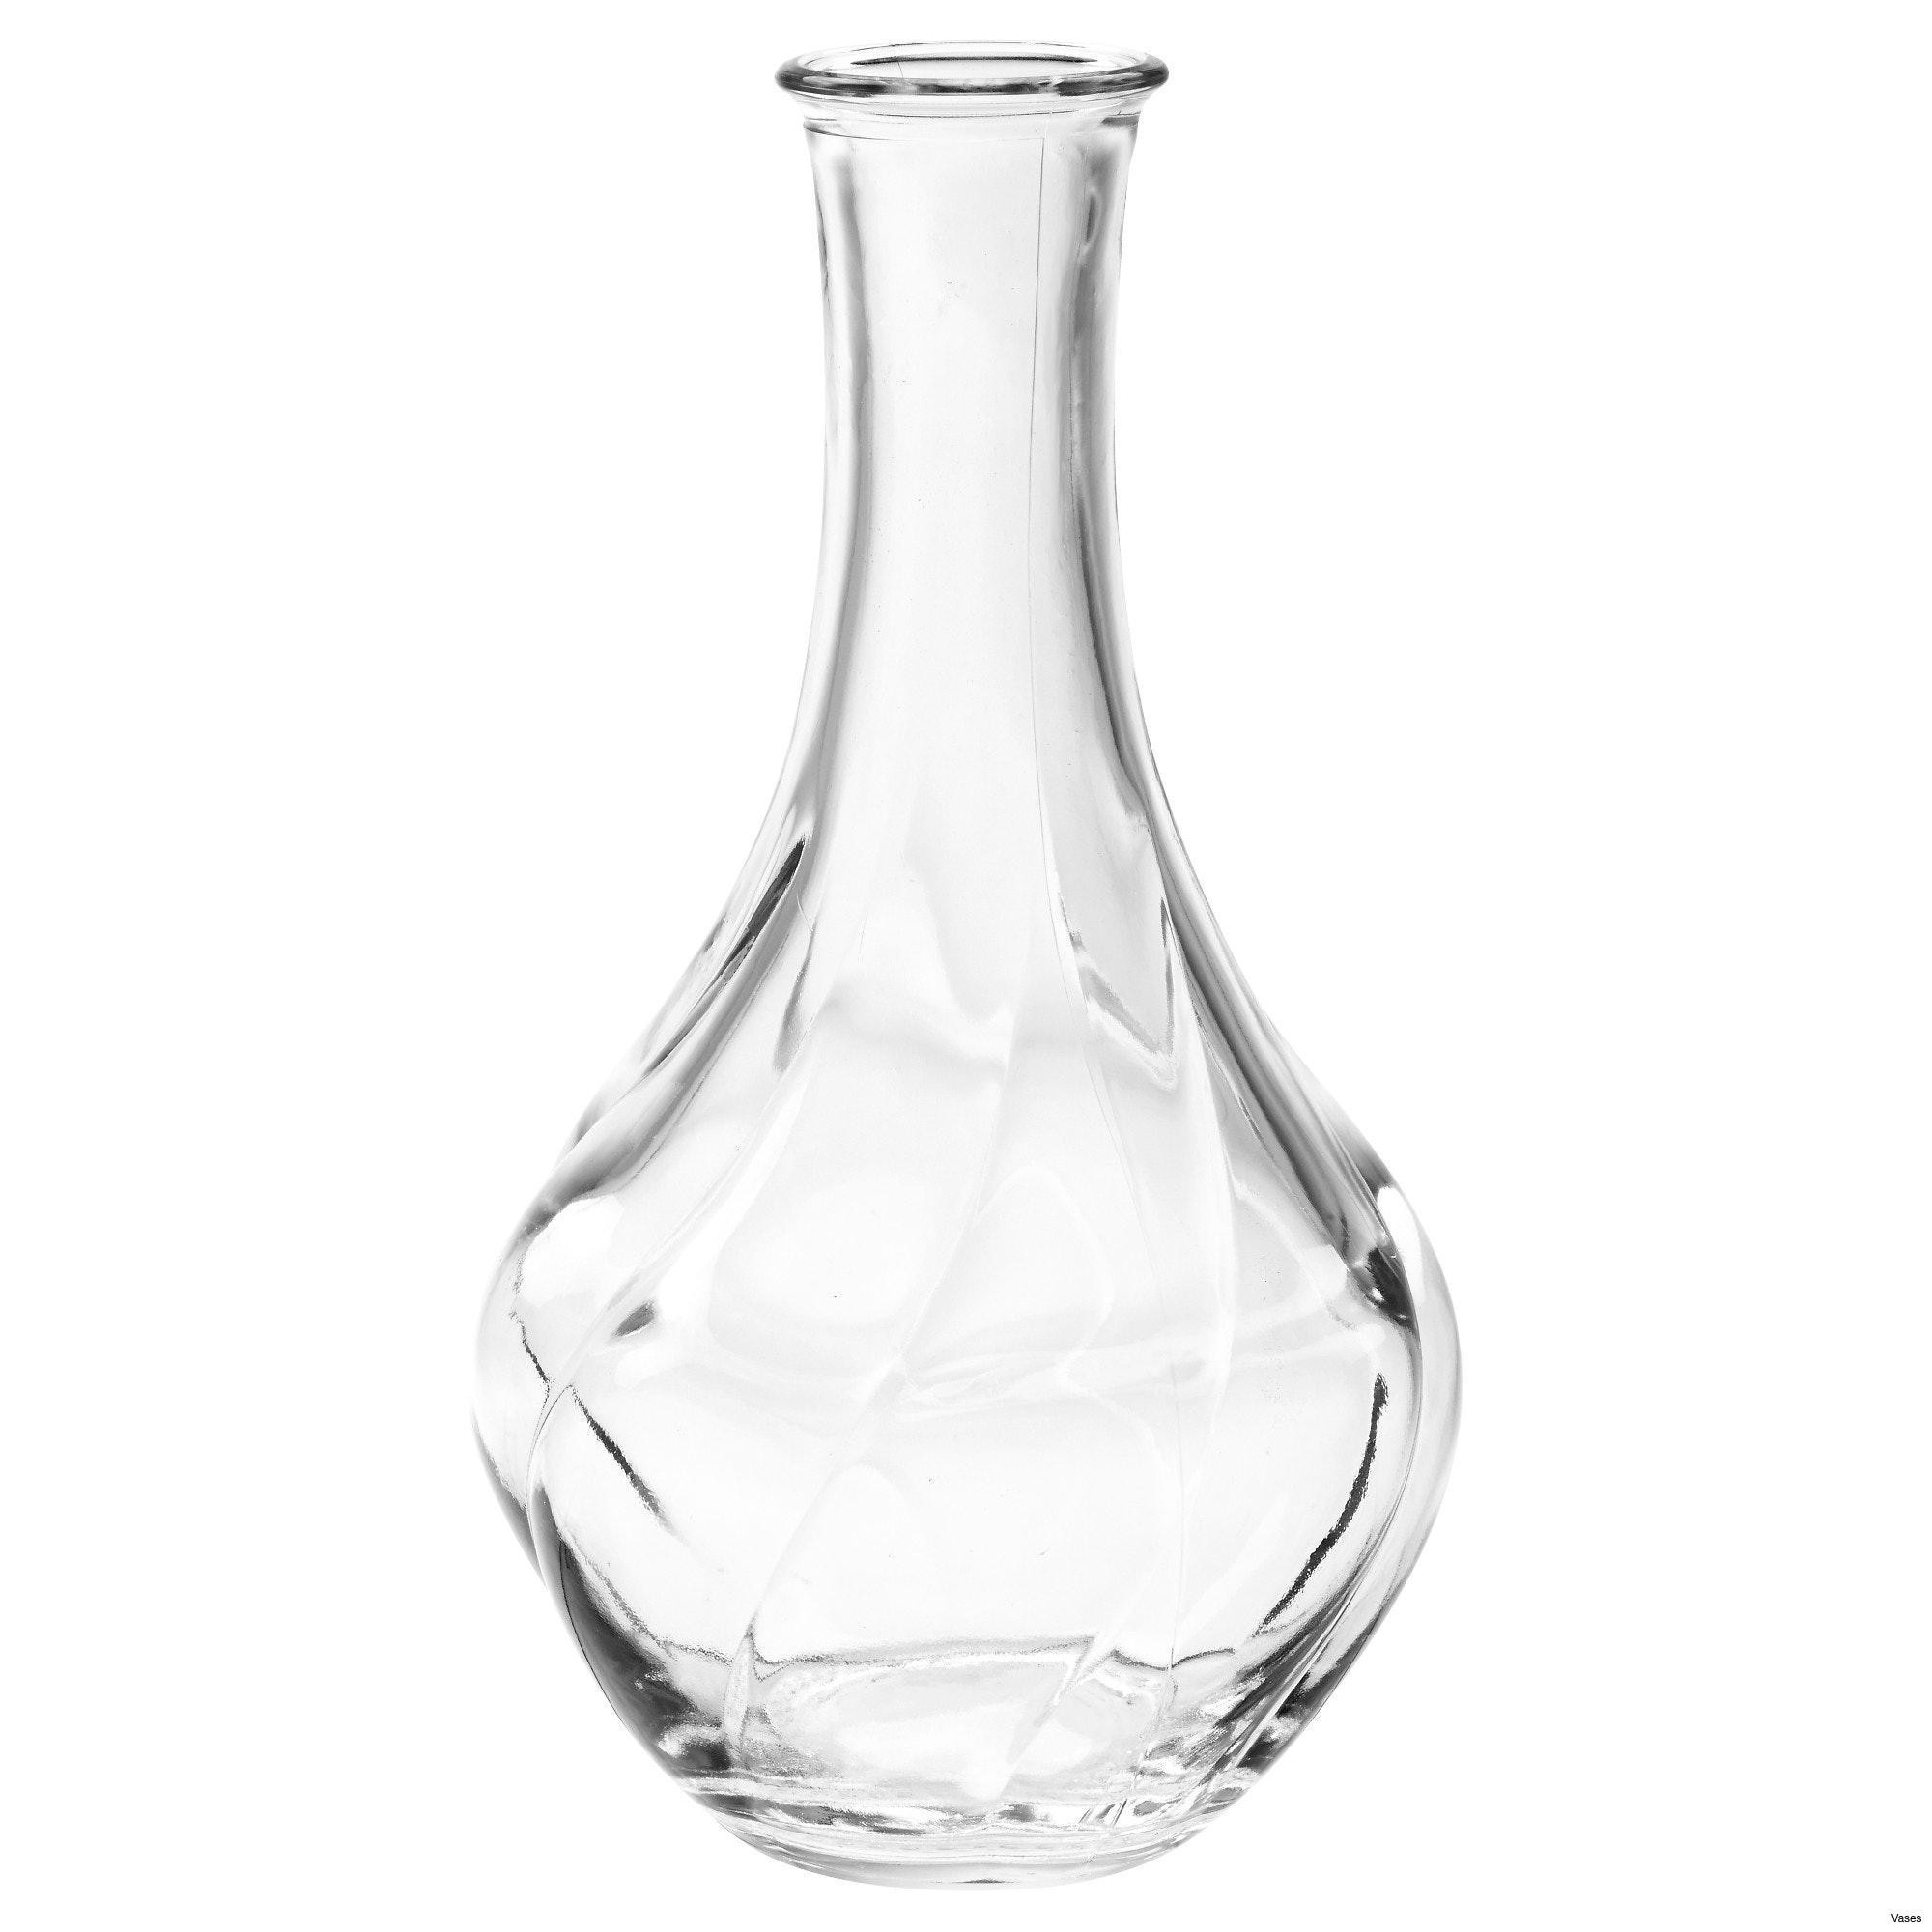 26 Fabulous Tall Wide Mouth Vases 2024 free download tall wide mouth vases of images of giant glass vase vases artificial plants collection with regard to giant glass vase images living room glass vases fresh clear vase 0d tags amazing and of